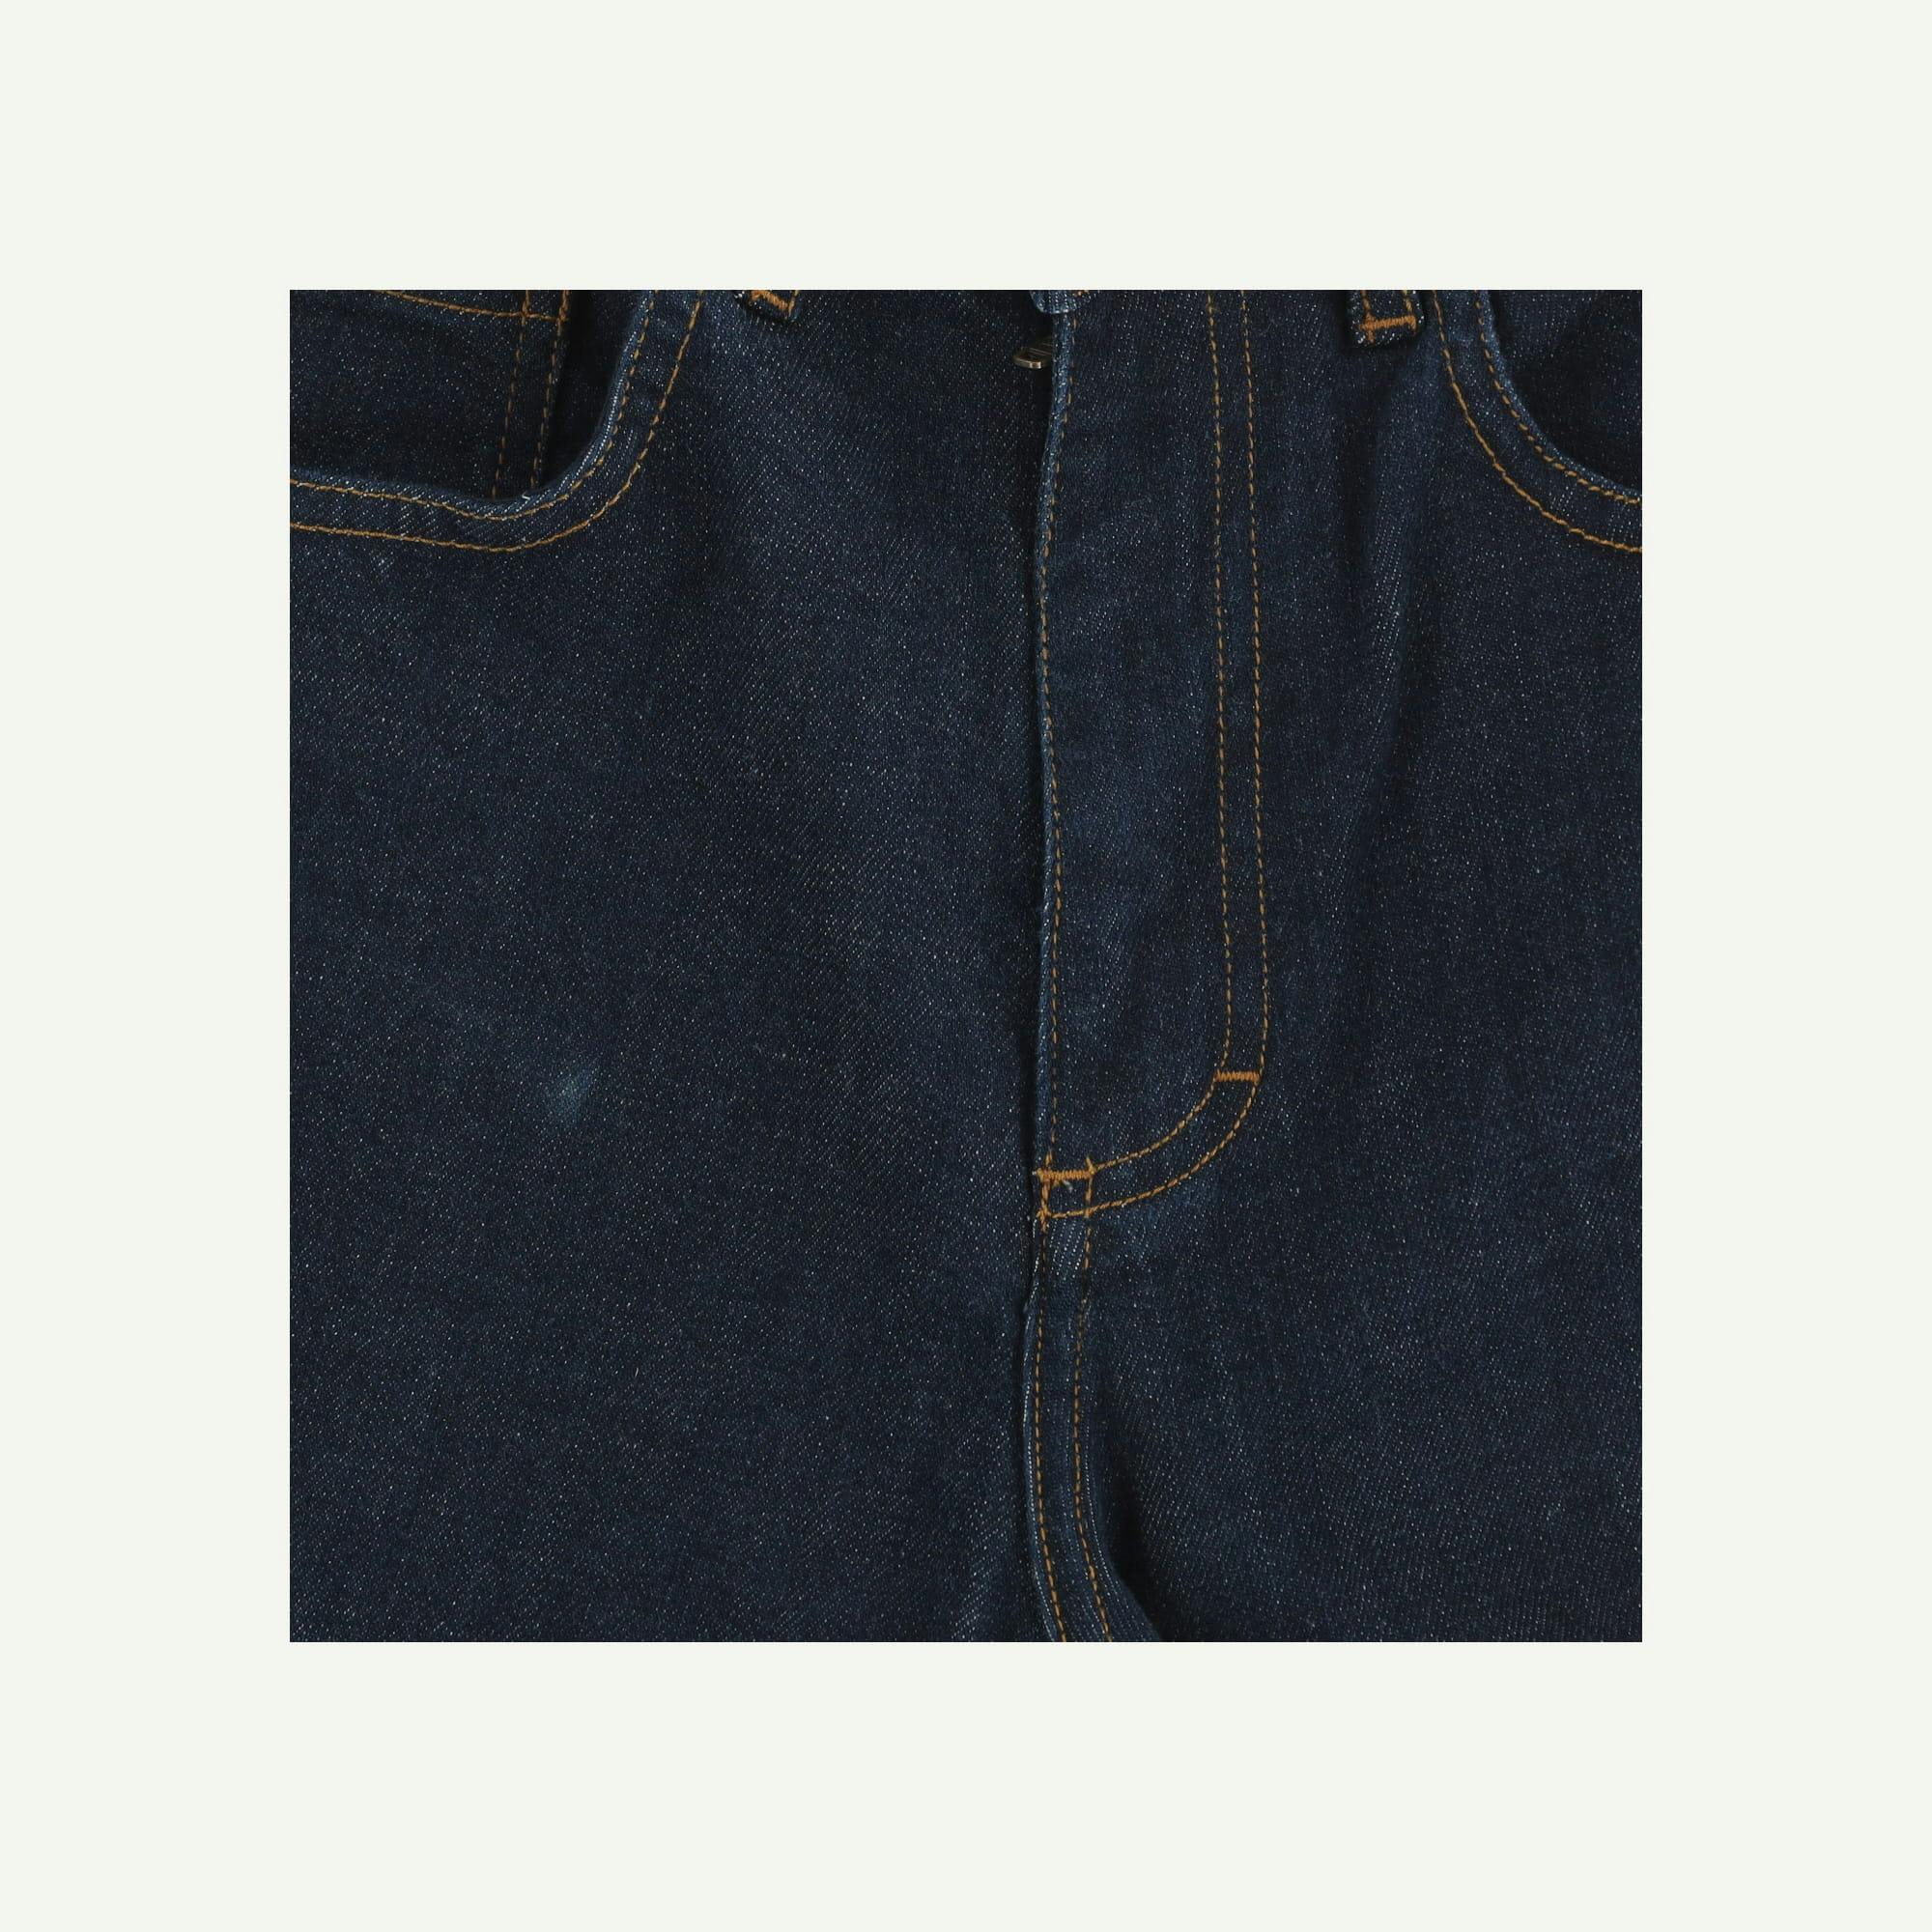 Finisterre Repaired Blue Jeans